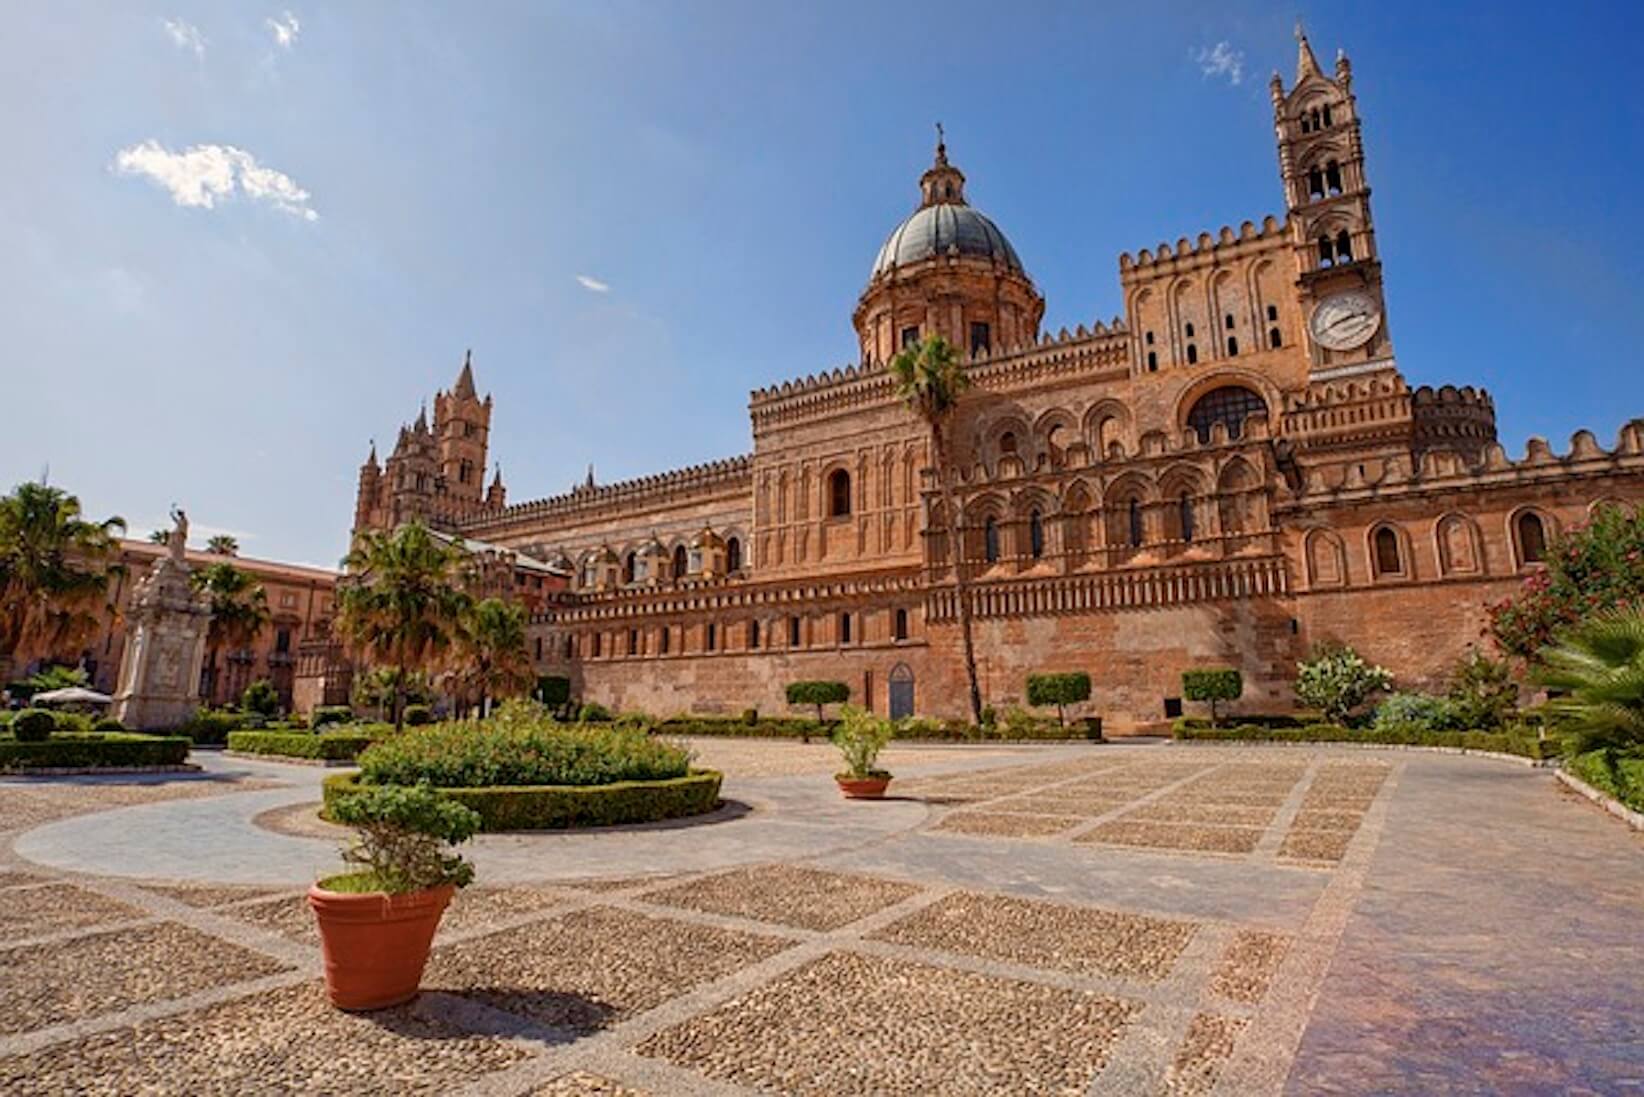 Courtyard in front of Palermo cathedral.